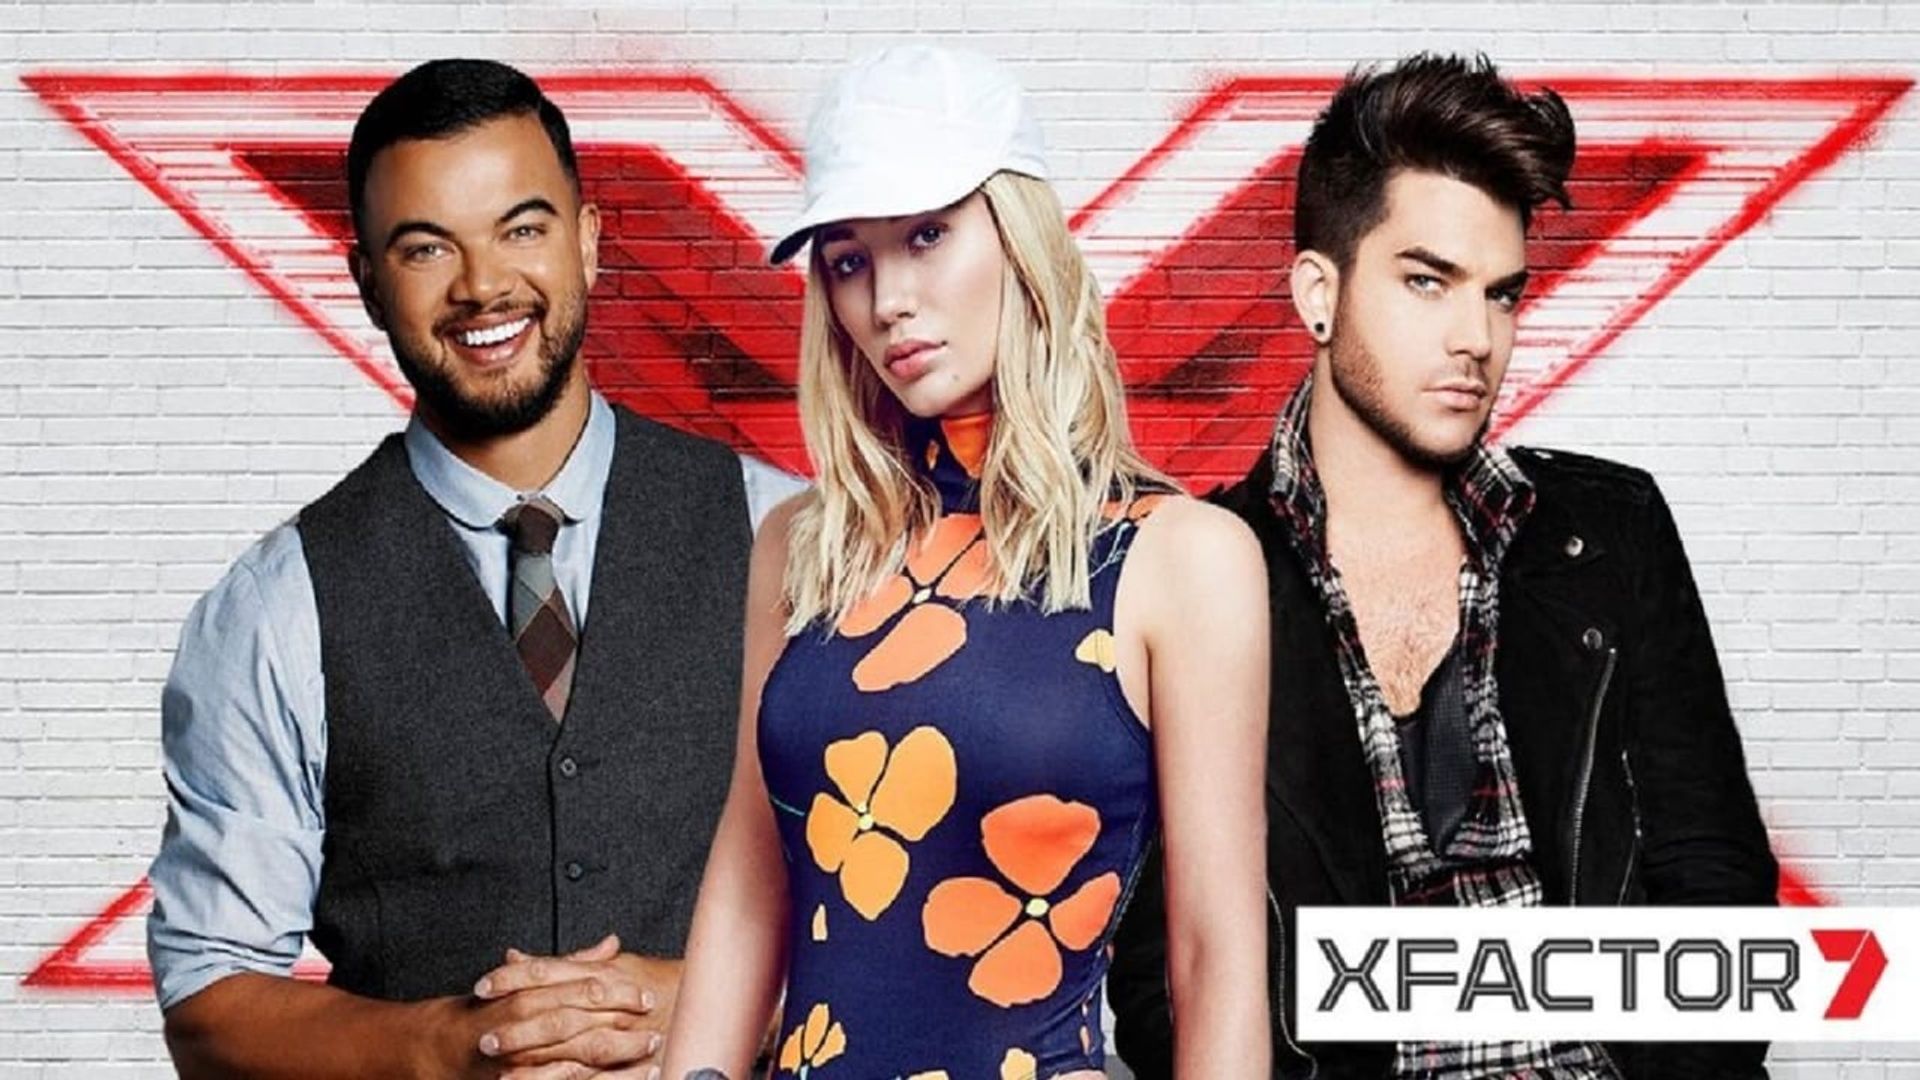 The X Factor background